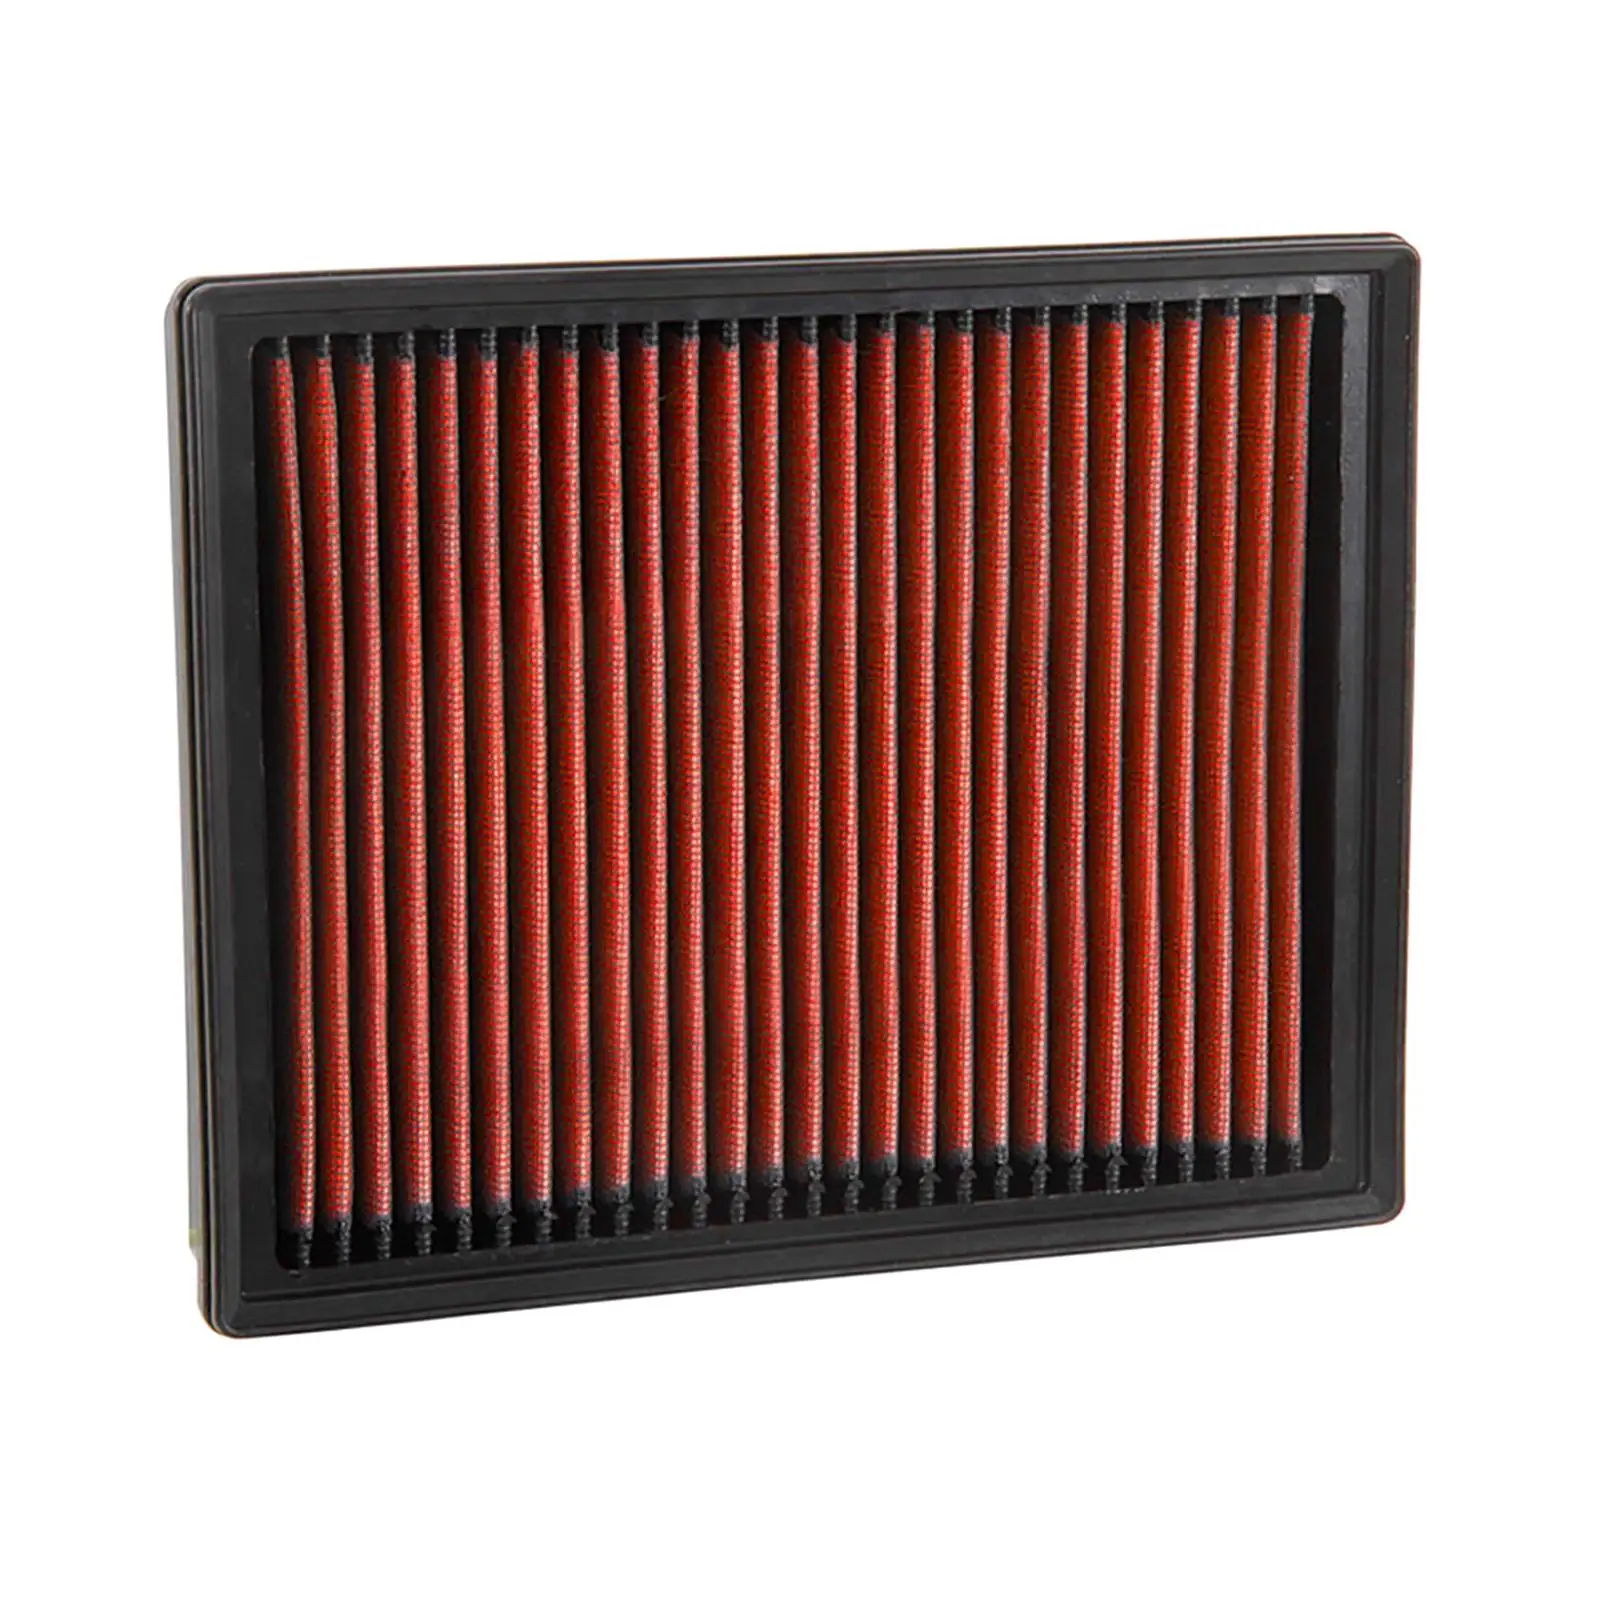 Engine Air Filter Long Use Interval Replacement Filter Air Filter Premium Washable for Ford 2018-2020 Atvs